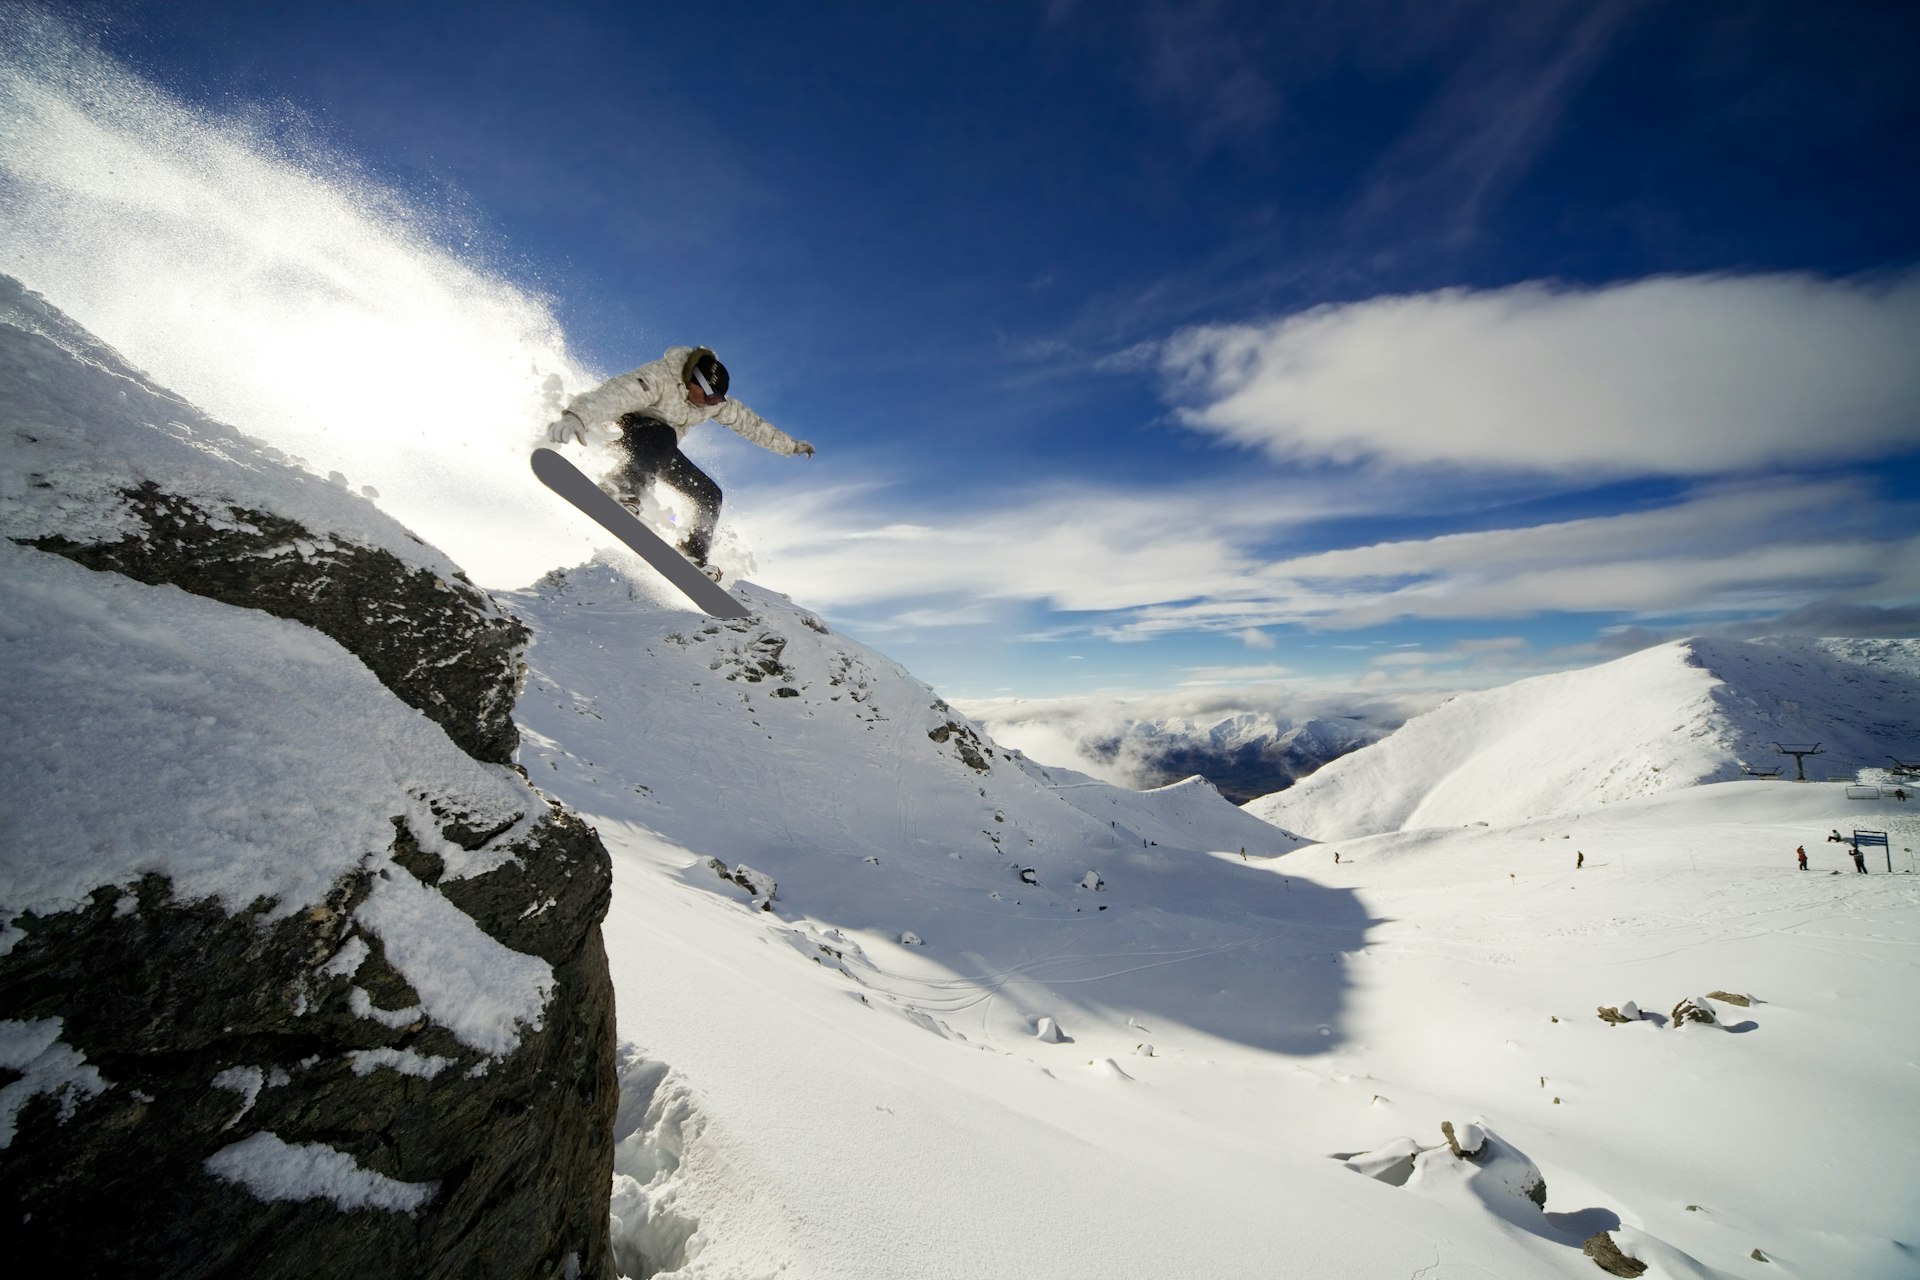 A snowboarder jumping off a cliff on a sunny day